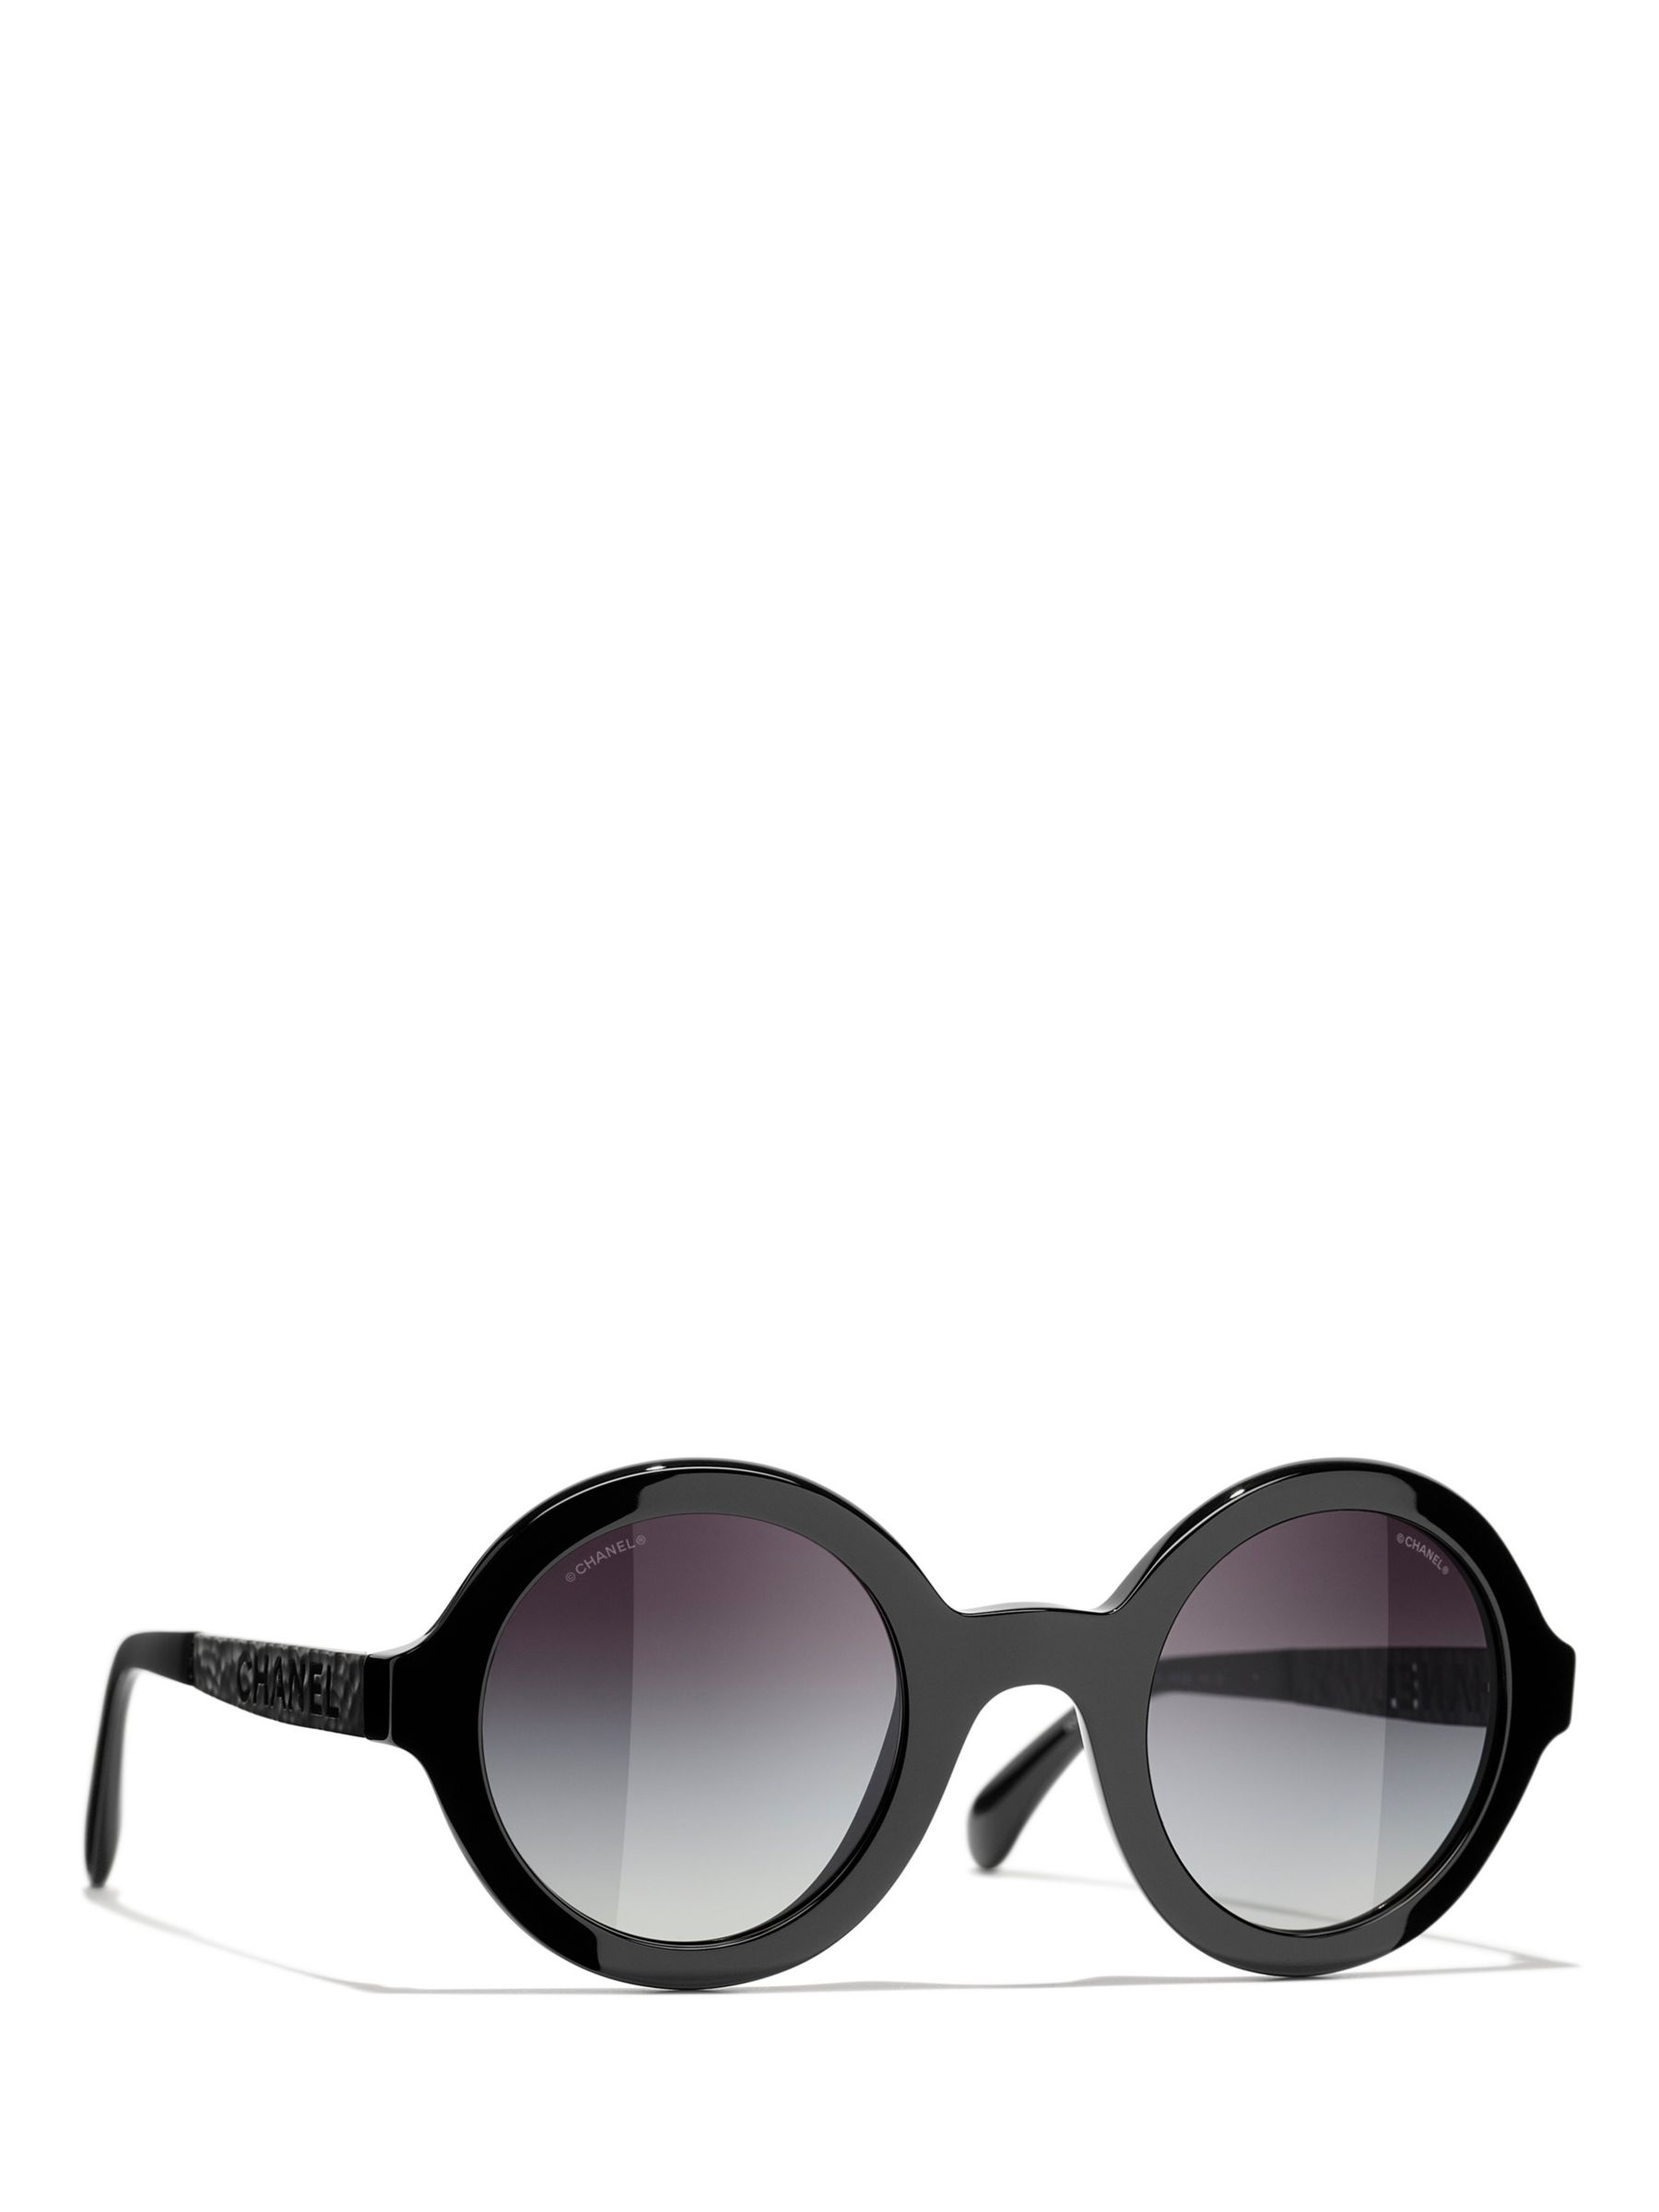 CHANEL Round Sunglasses CH5441 Black/Grey Gradient at John Lewis & Partners